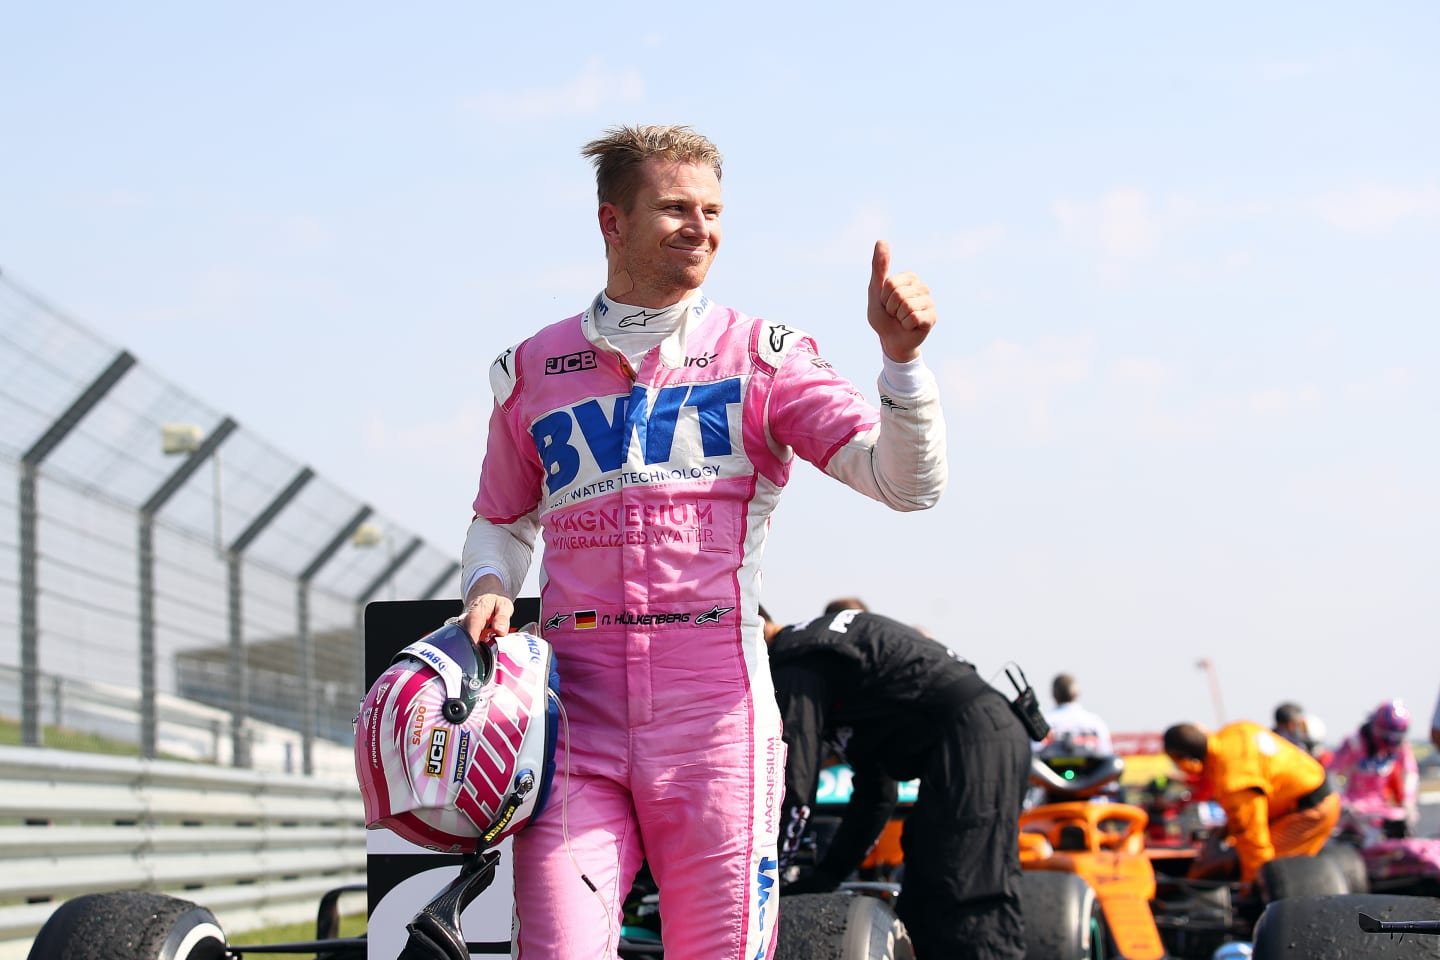 NORTHAMPTON, ENGLAND - AUGUST 09: Nico Hulkenberg of Germany and Racing Point reacts in parc ferme during the F1 70th Anniversary Grand Prix at Silverstone on August 09, 2020 in Northampton, England. (Photo by Bryn Lennon/Getty Images)